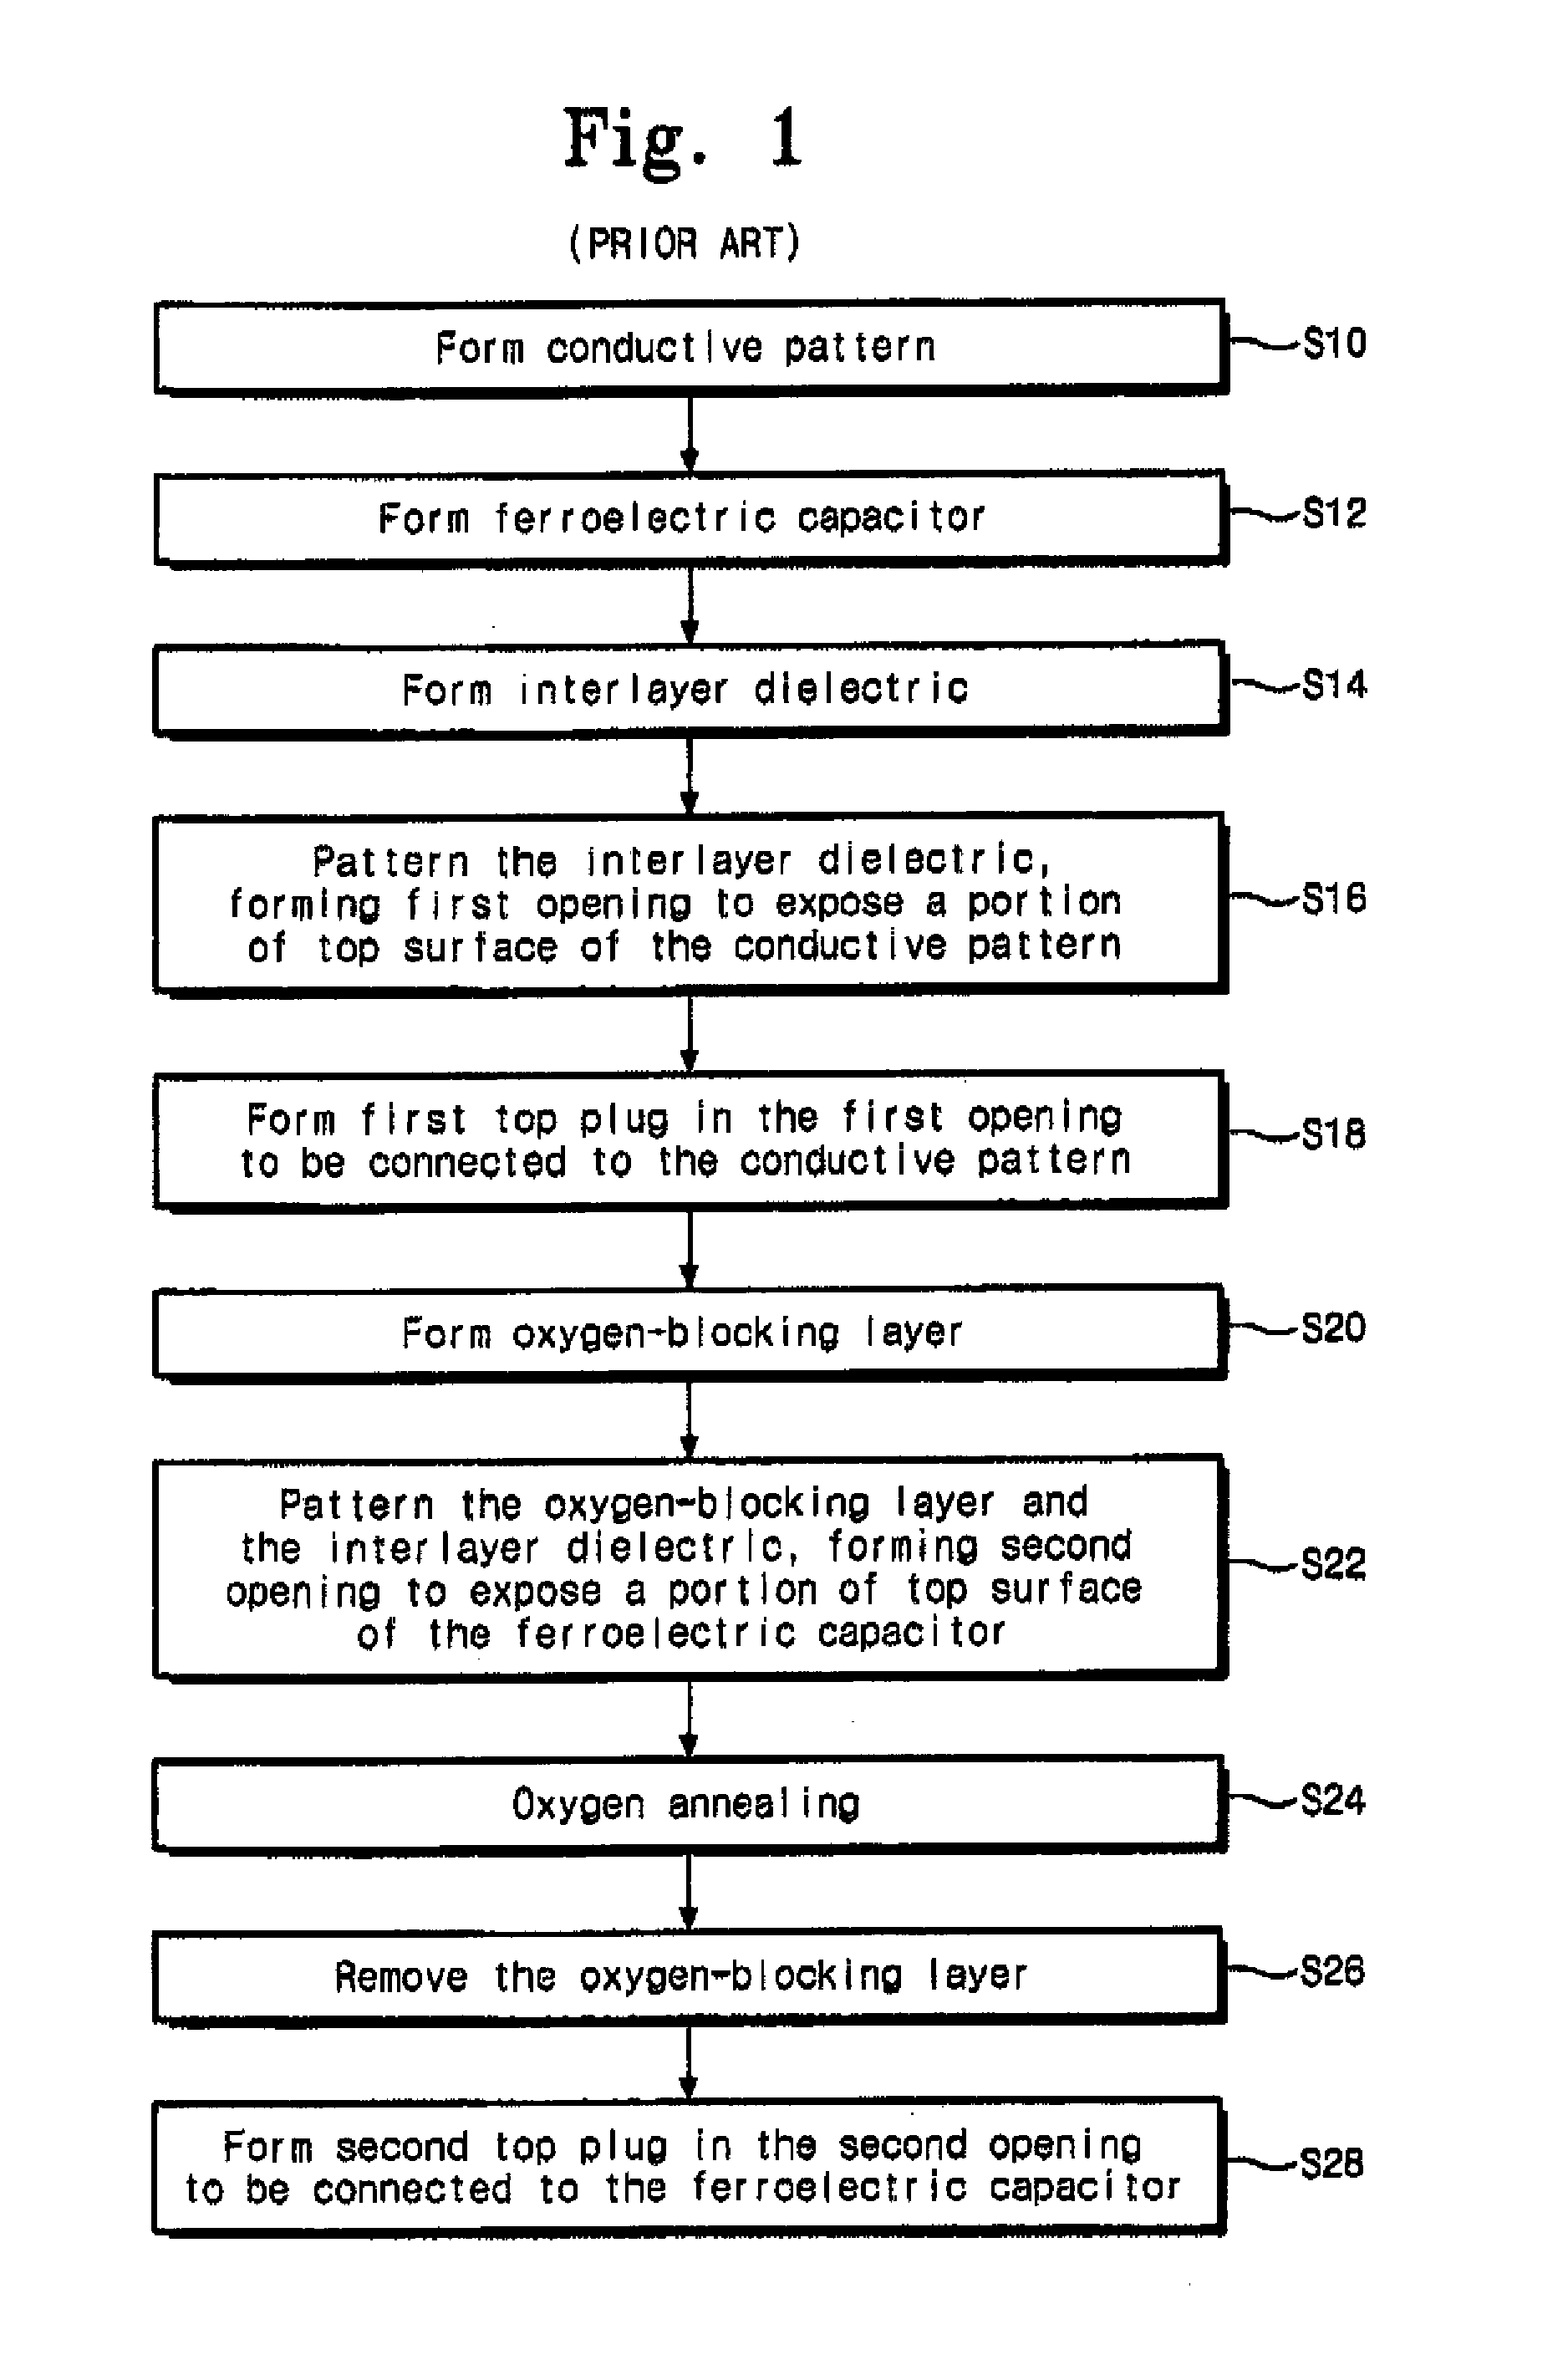 Ferroelectric random access memory and methods of fabricating the same